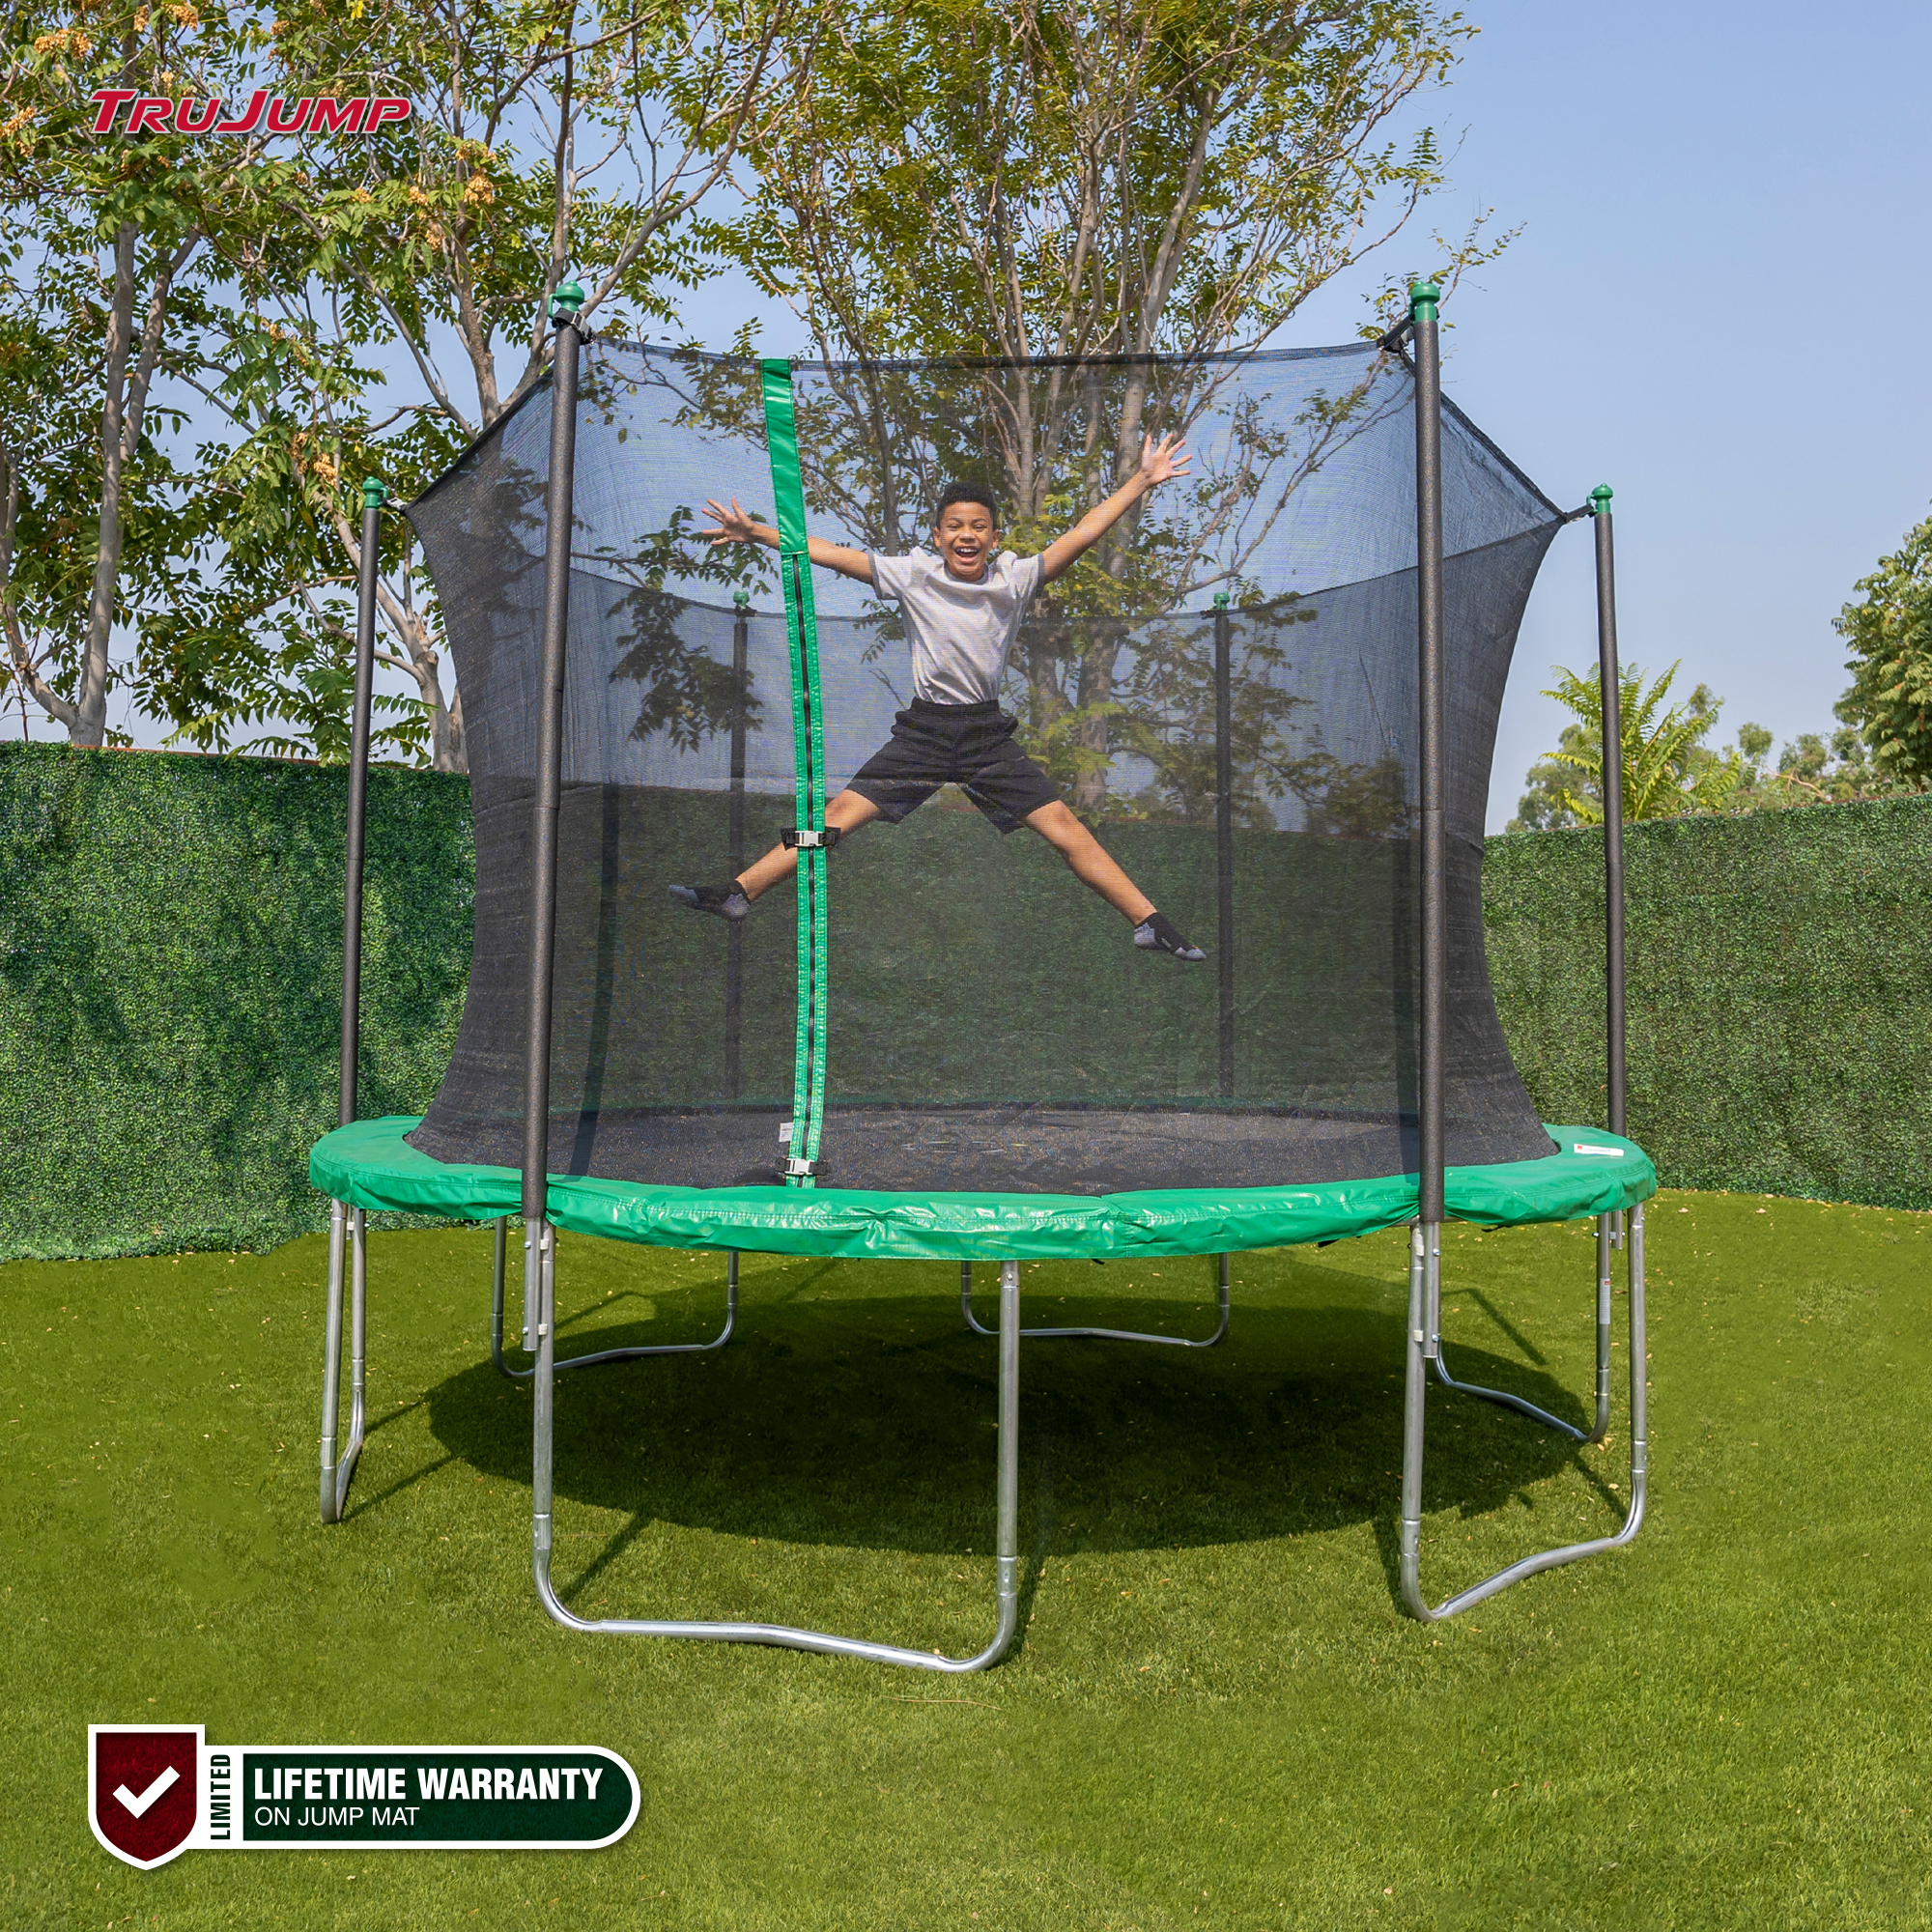 TruJump 12' Trampoline with Safety Enclosure & Jump Mat with Lifetime Warranty (Green) - image 1 of 9